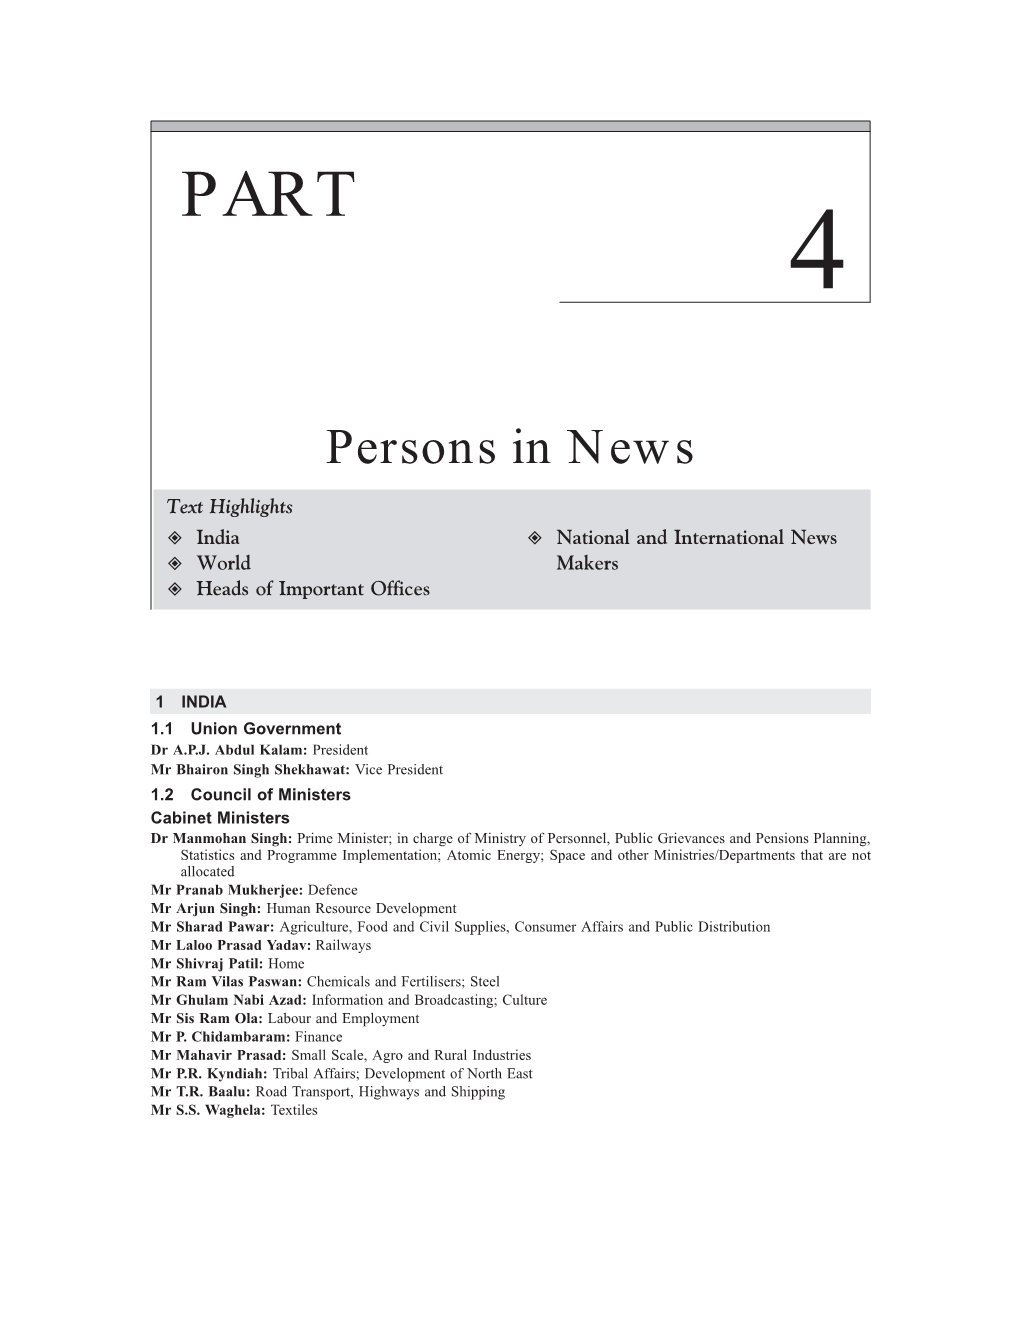 Persons in News Text Highlights ² India ² National and International News ² World Makers ² Heads of Important Offices